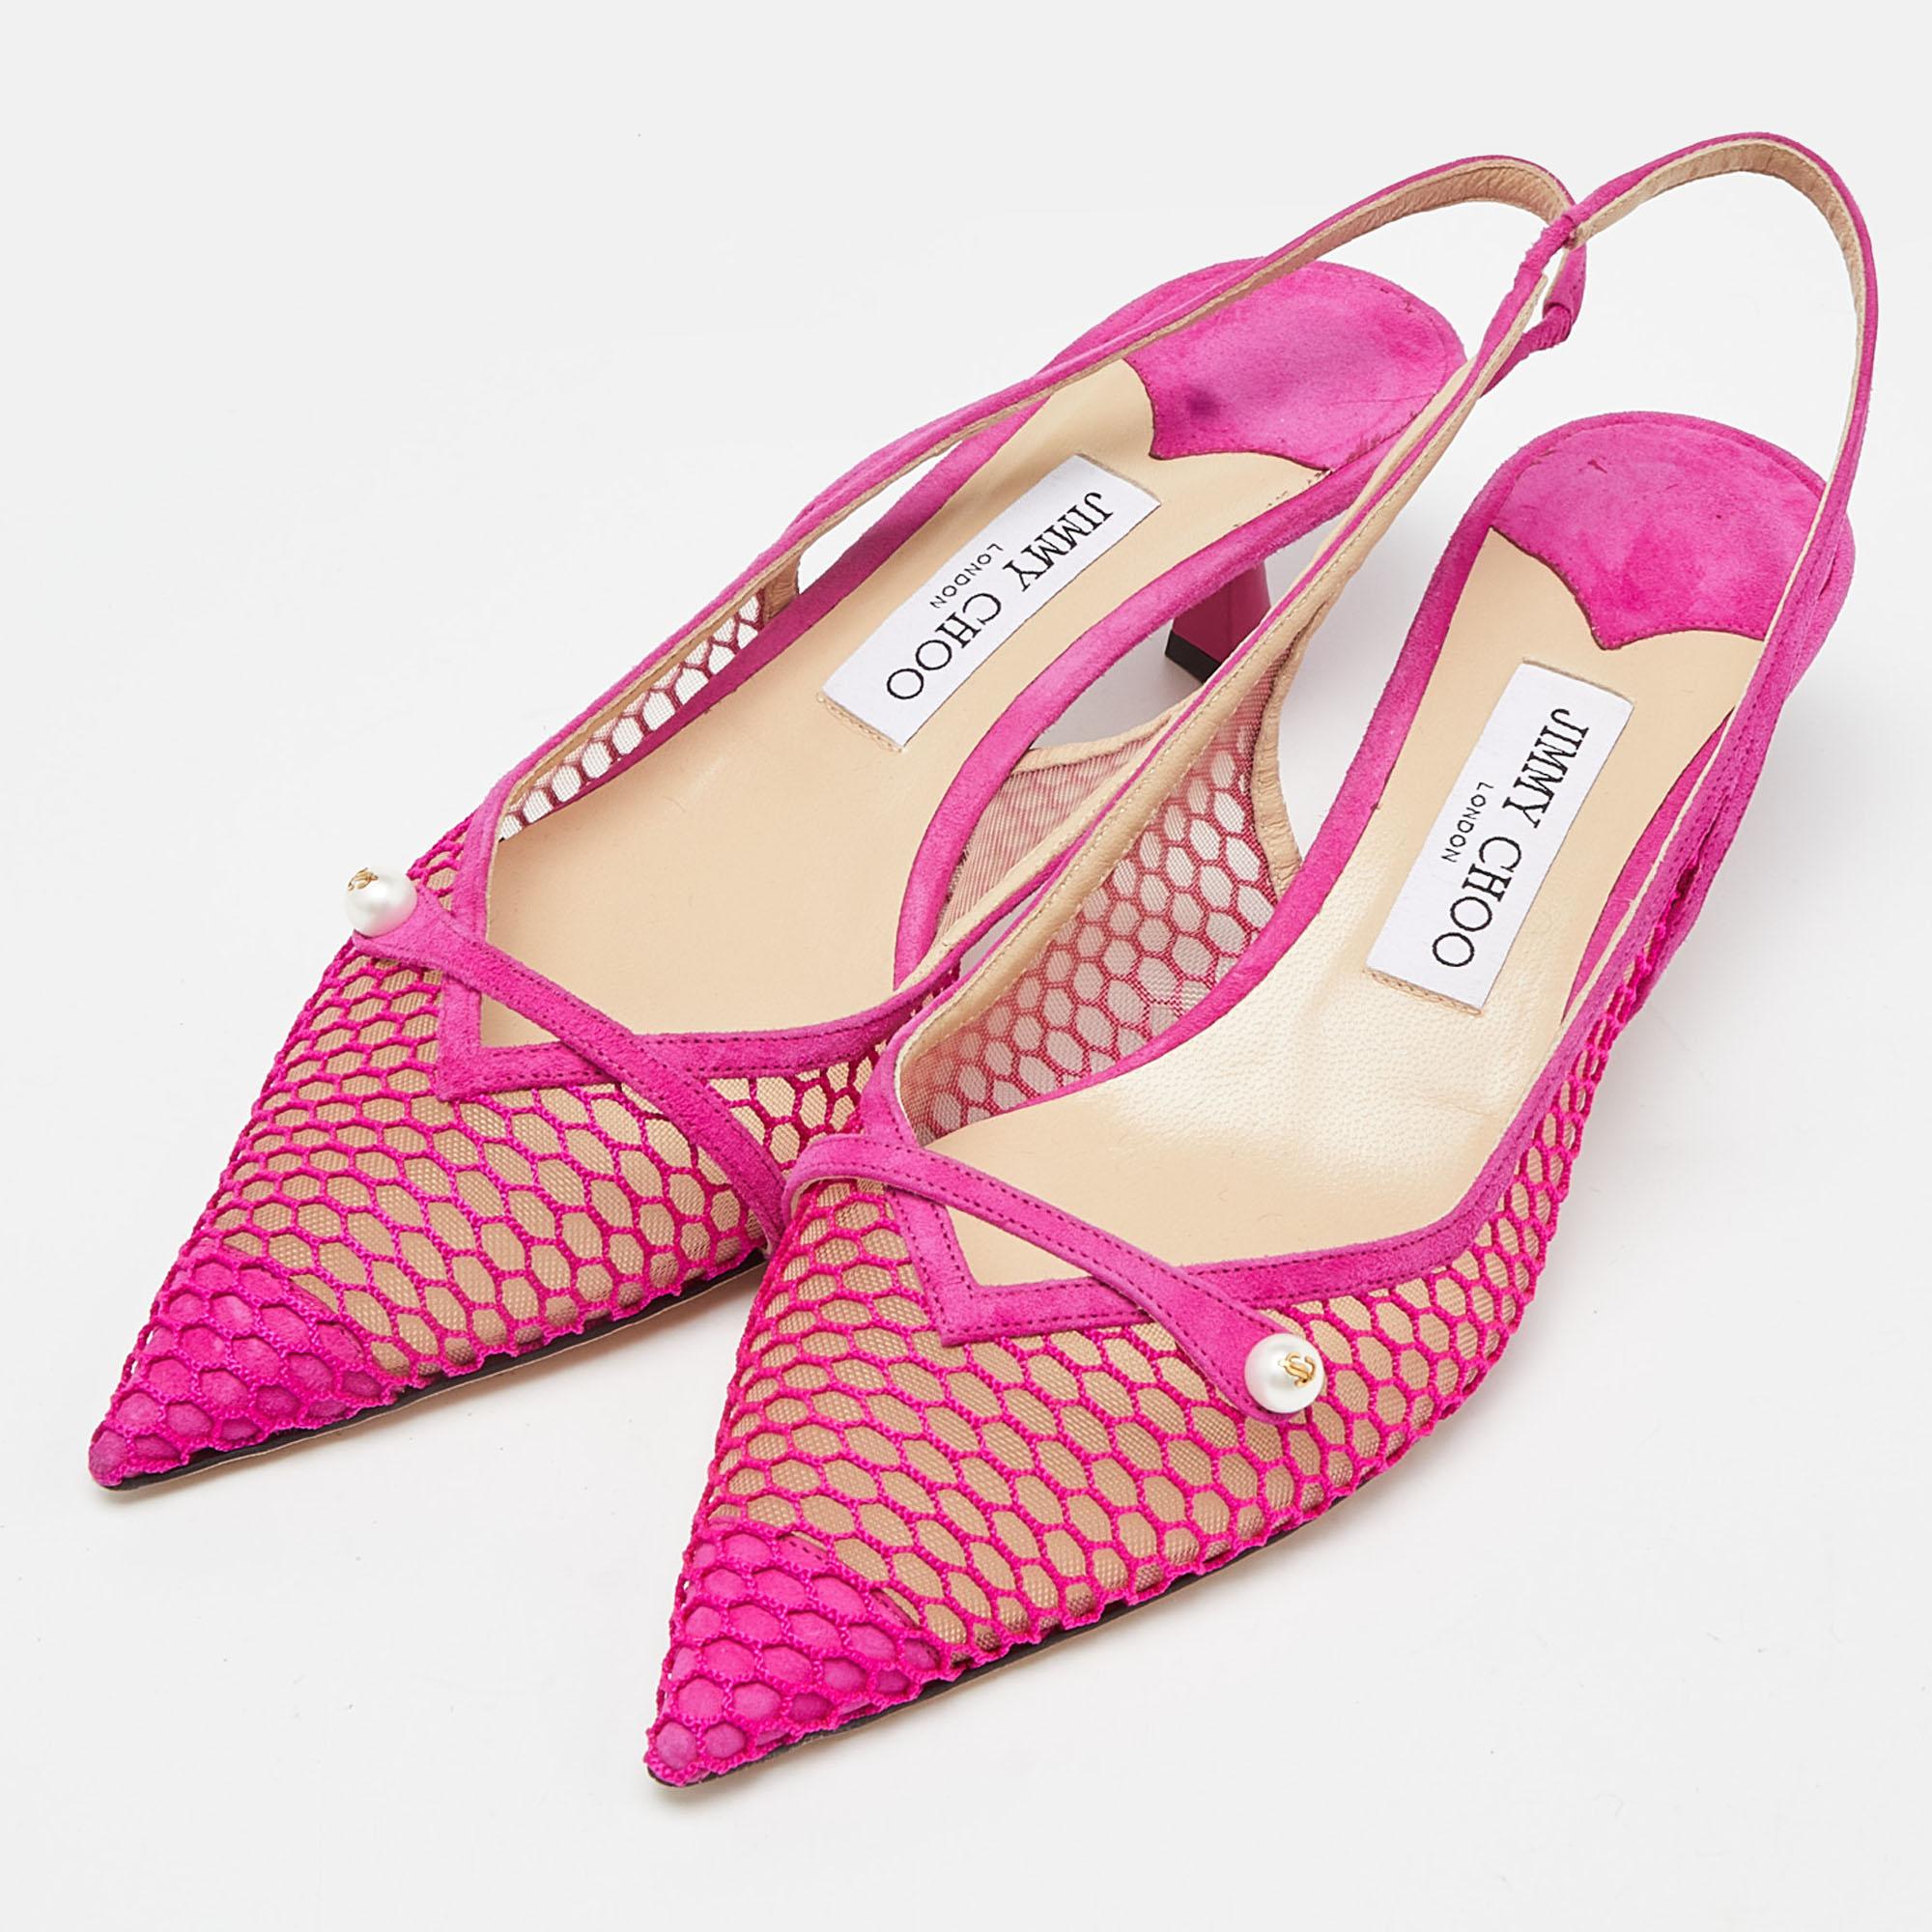 The fashion house’s tradition of excellence, coupled with modern design sensibilities, works to make these pink slingback pumps a fabulous choice. They'll help you deliver a chic look with ease.

